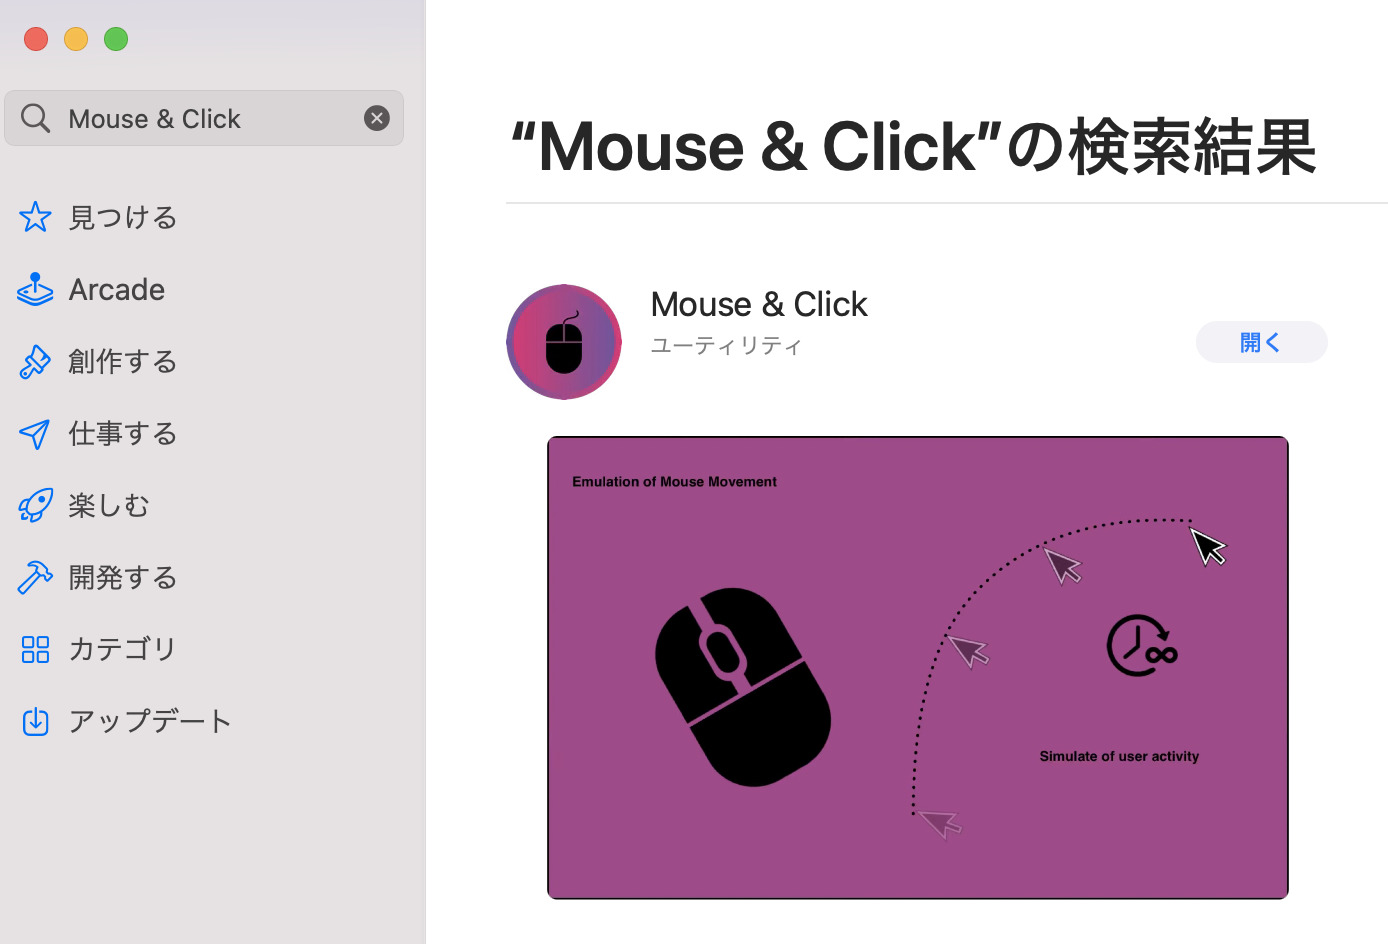 Search Mouse & Click